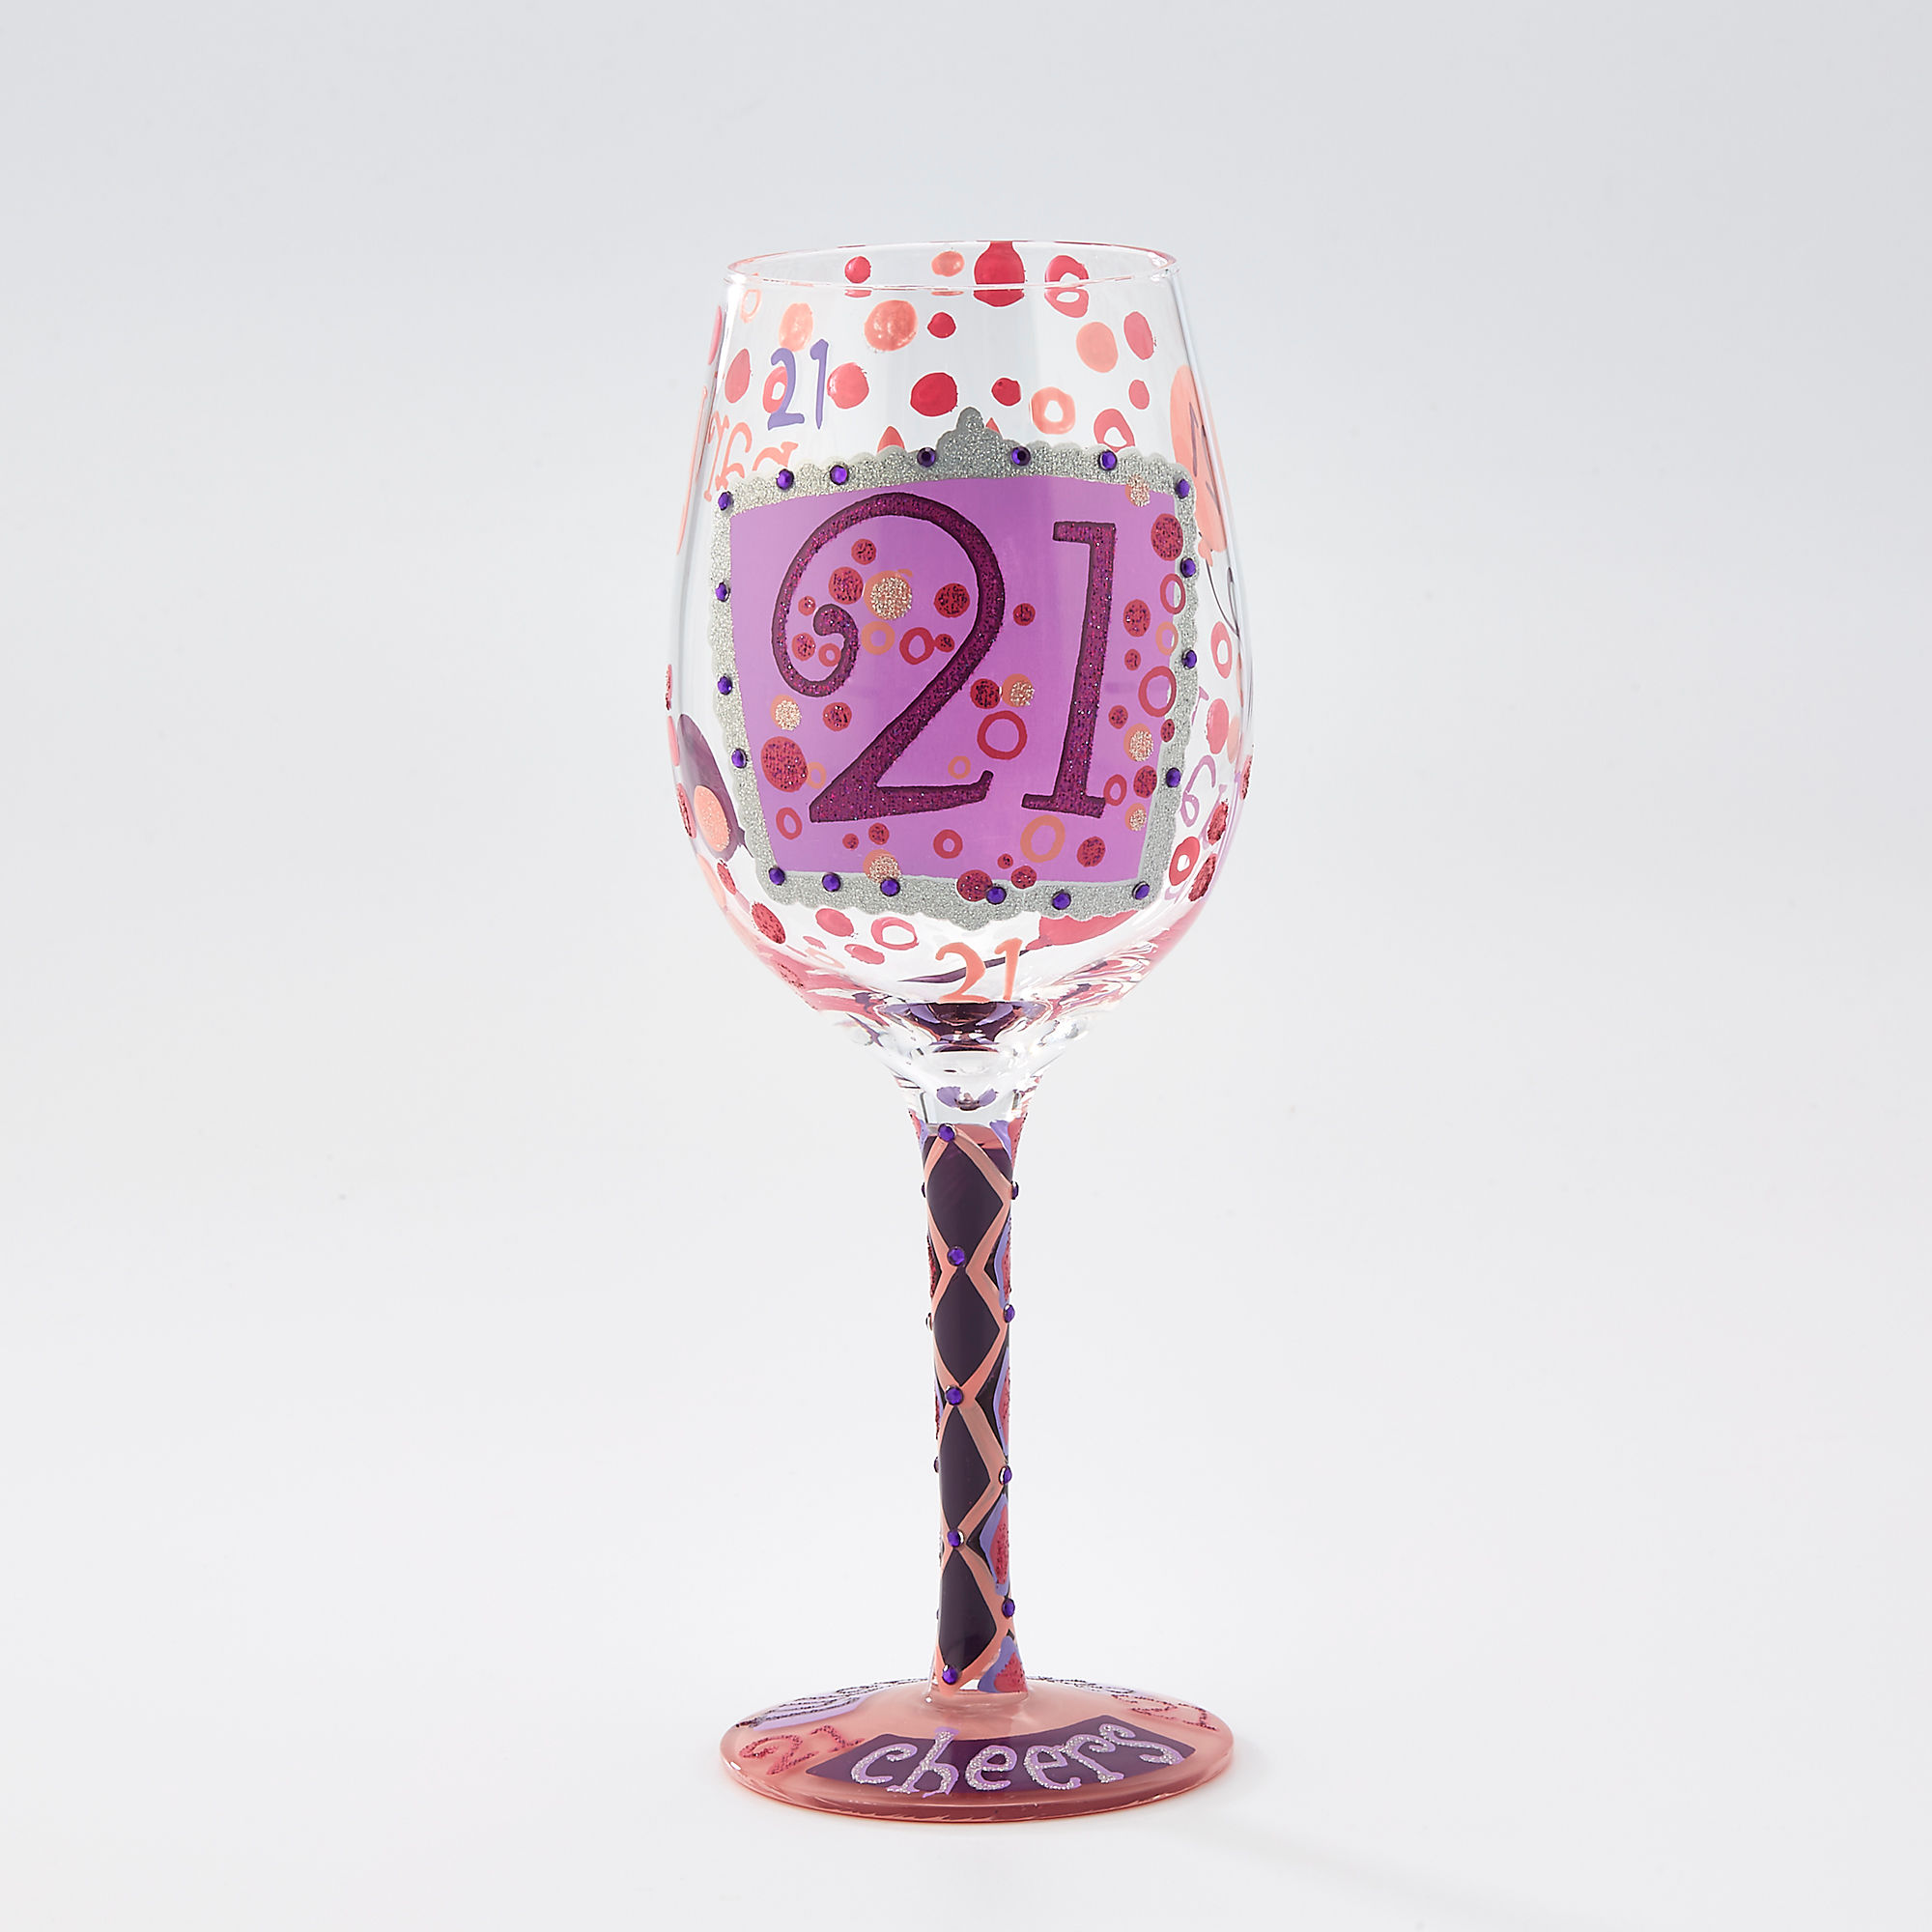 People Portrait champagne birthday anniversary wedding Painted Caricature champagne glasses